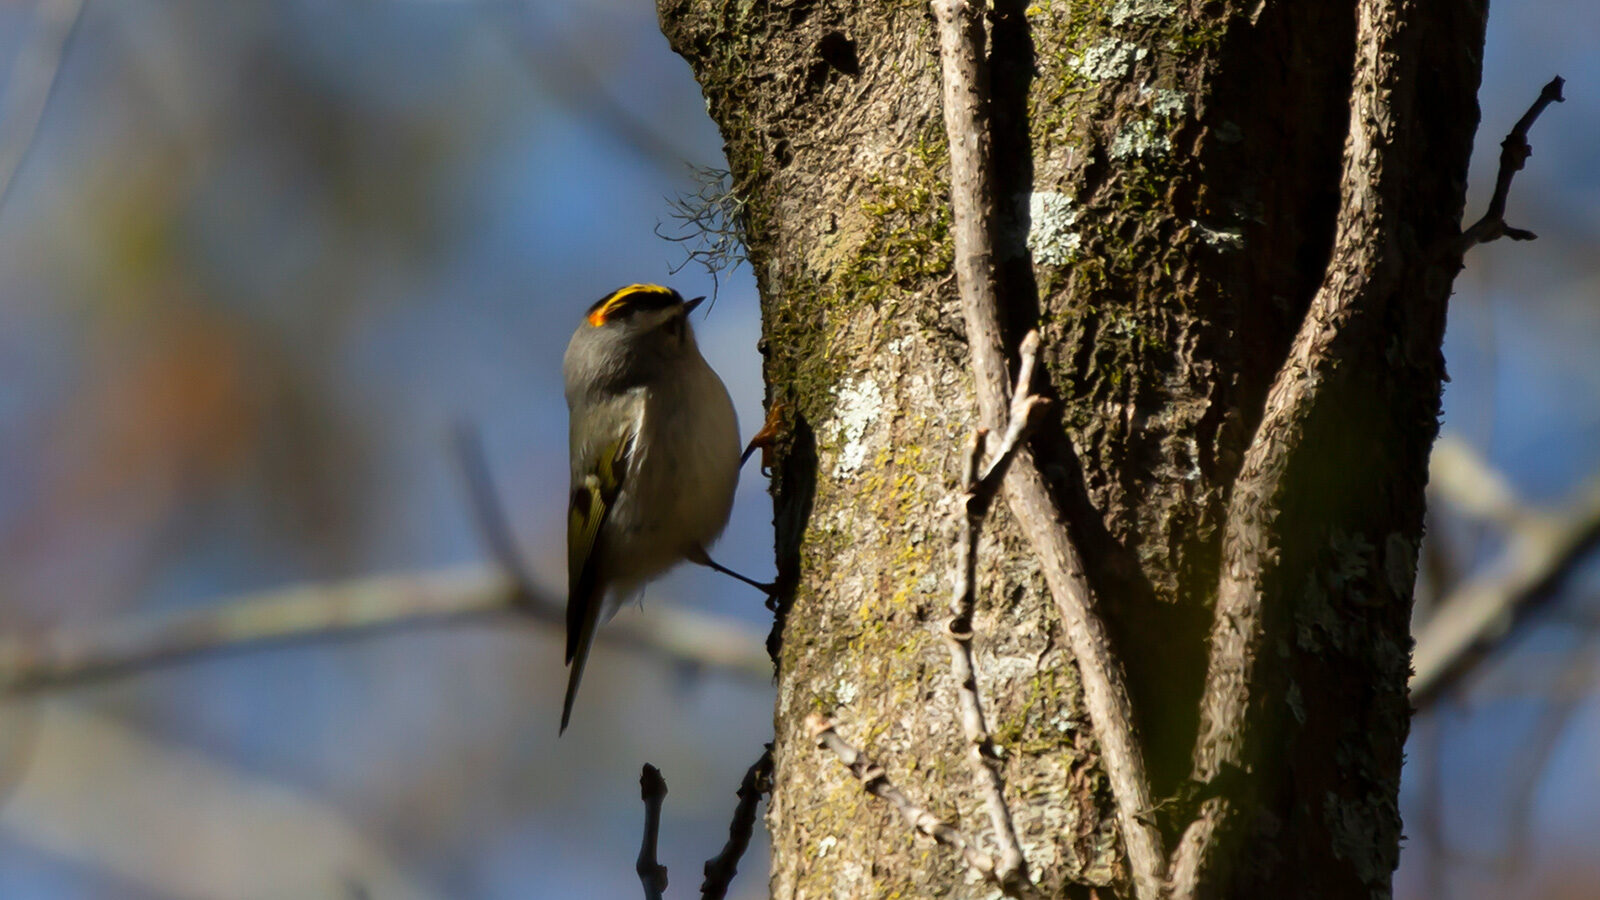 Golden-crowned kinglet foraging in a tree